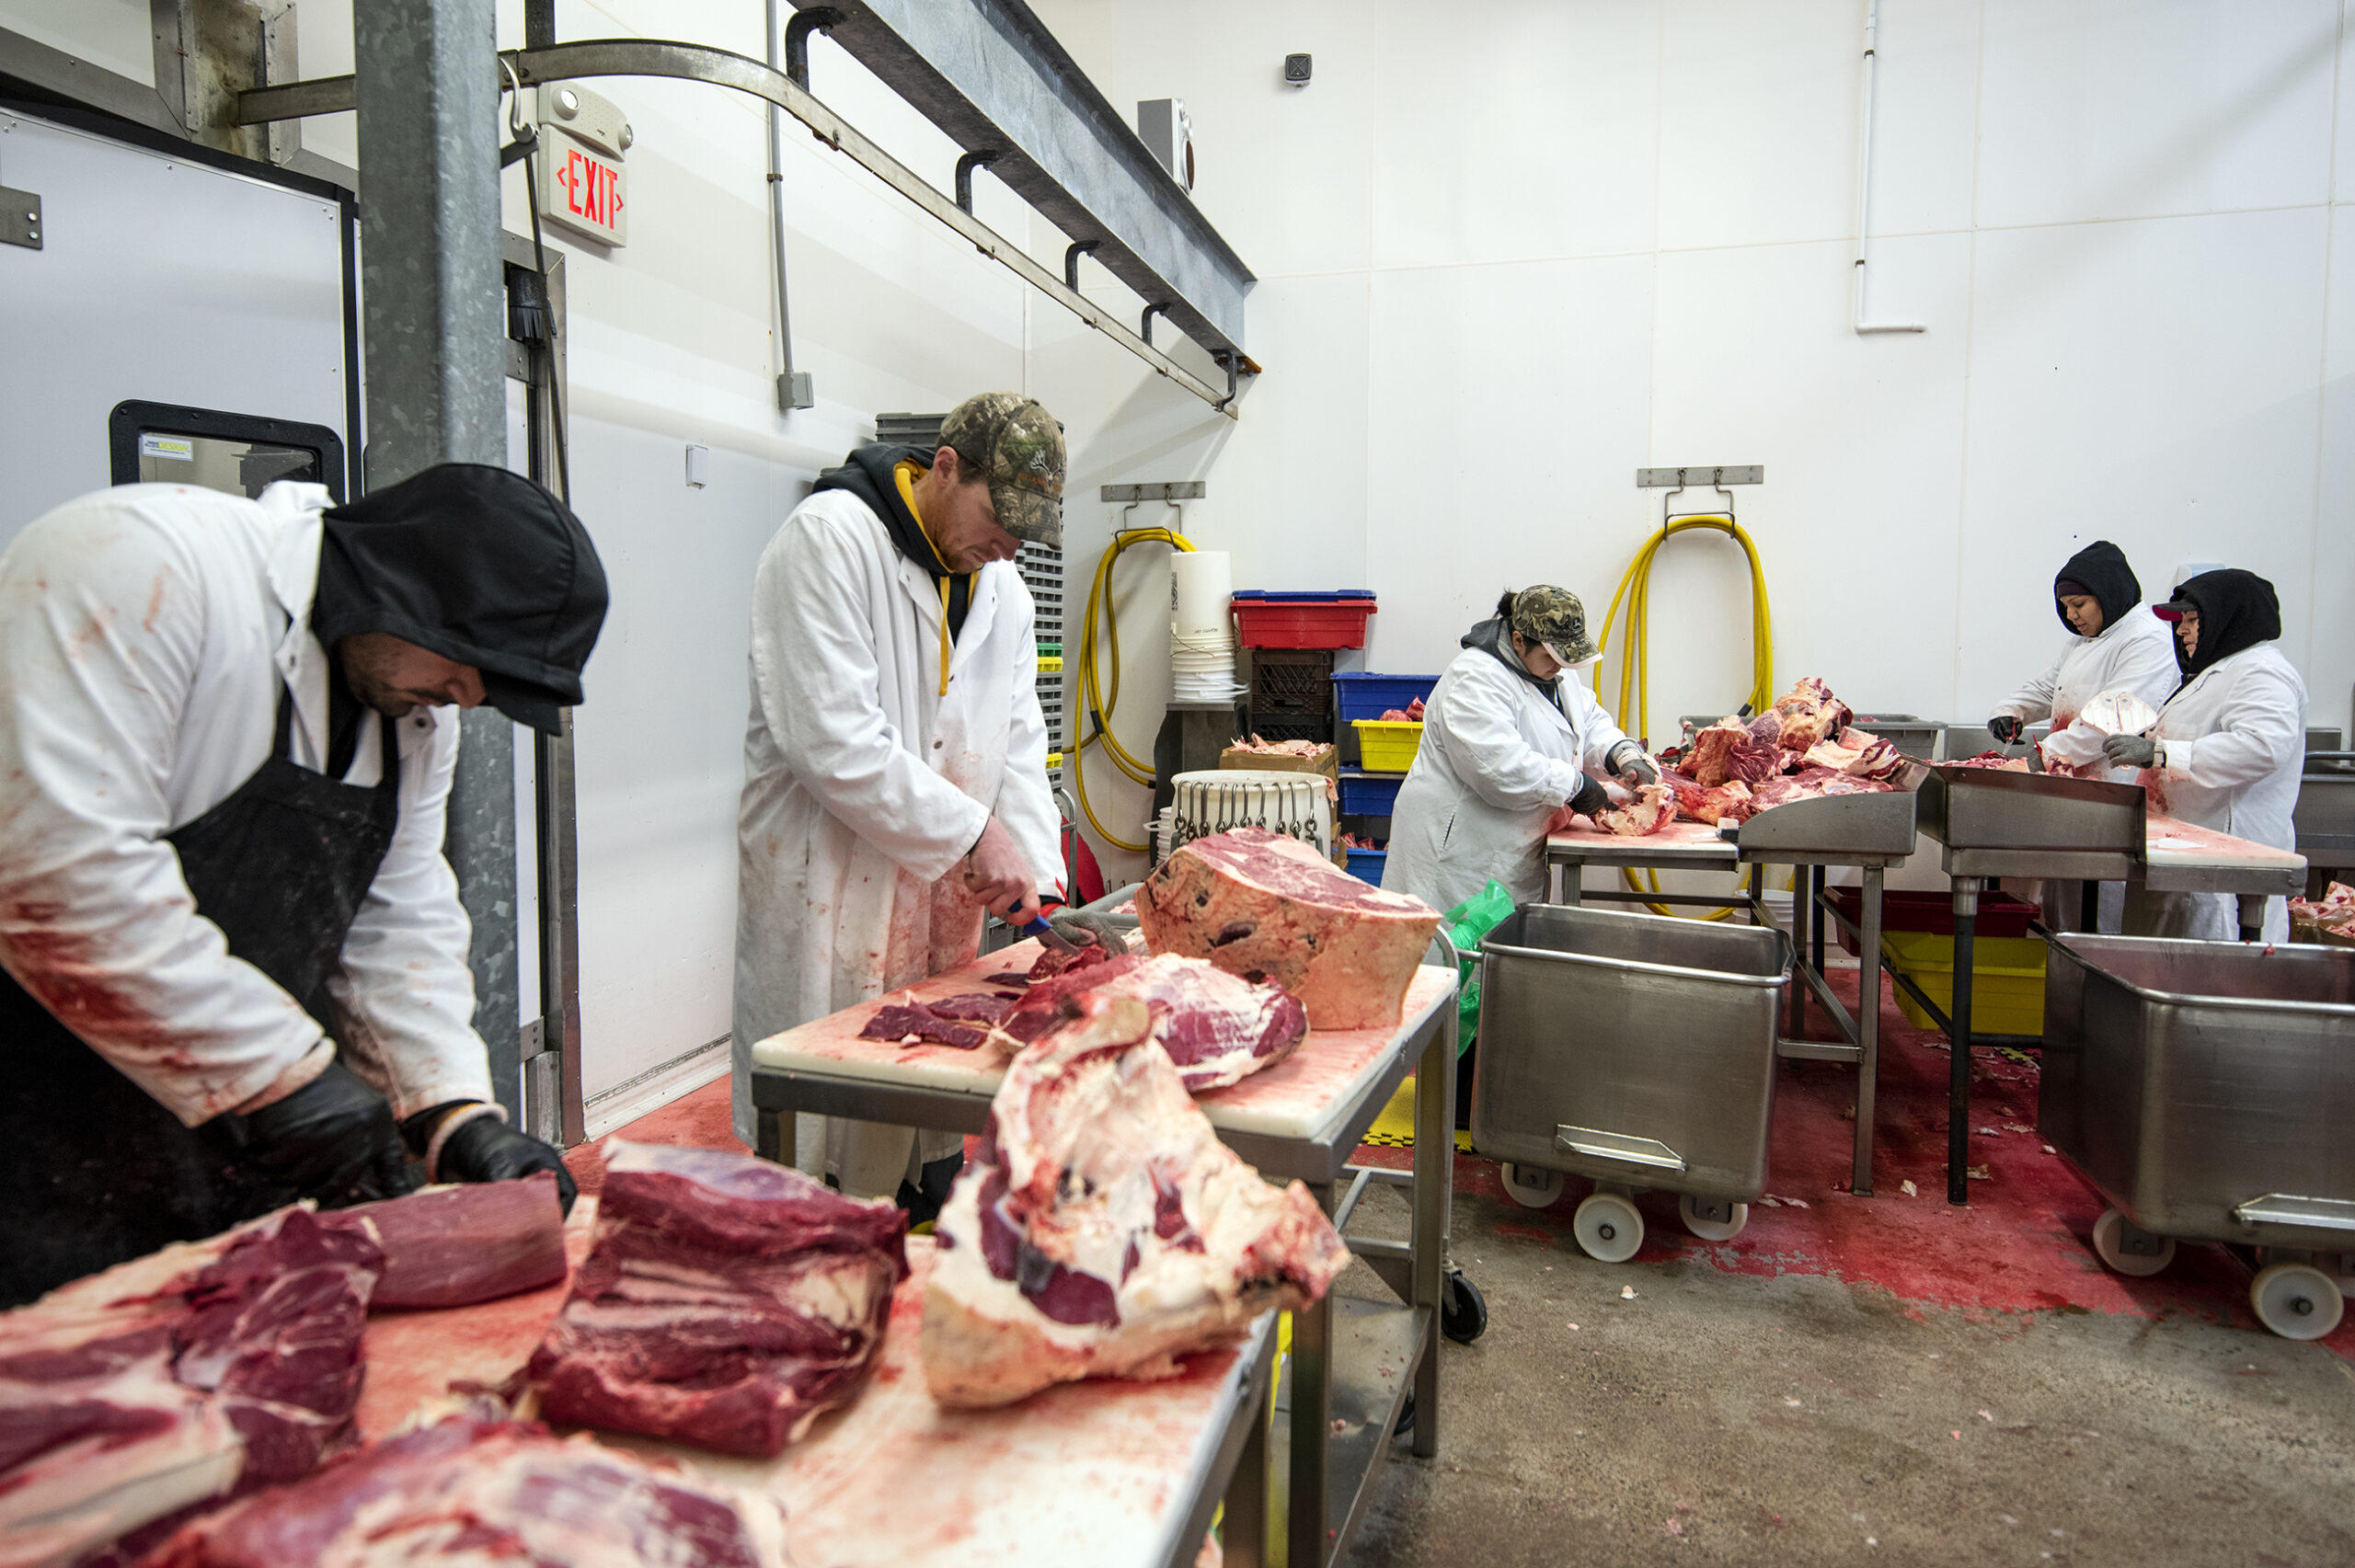 UW-River Falls program will offer in-depth training on humane handling of animals by meat industry workers